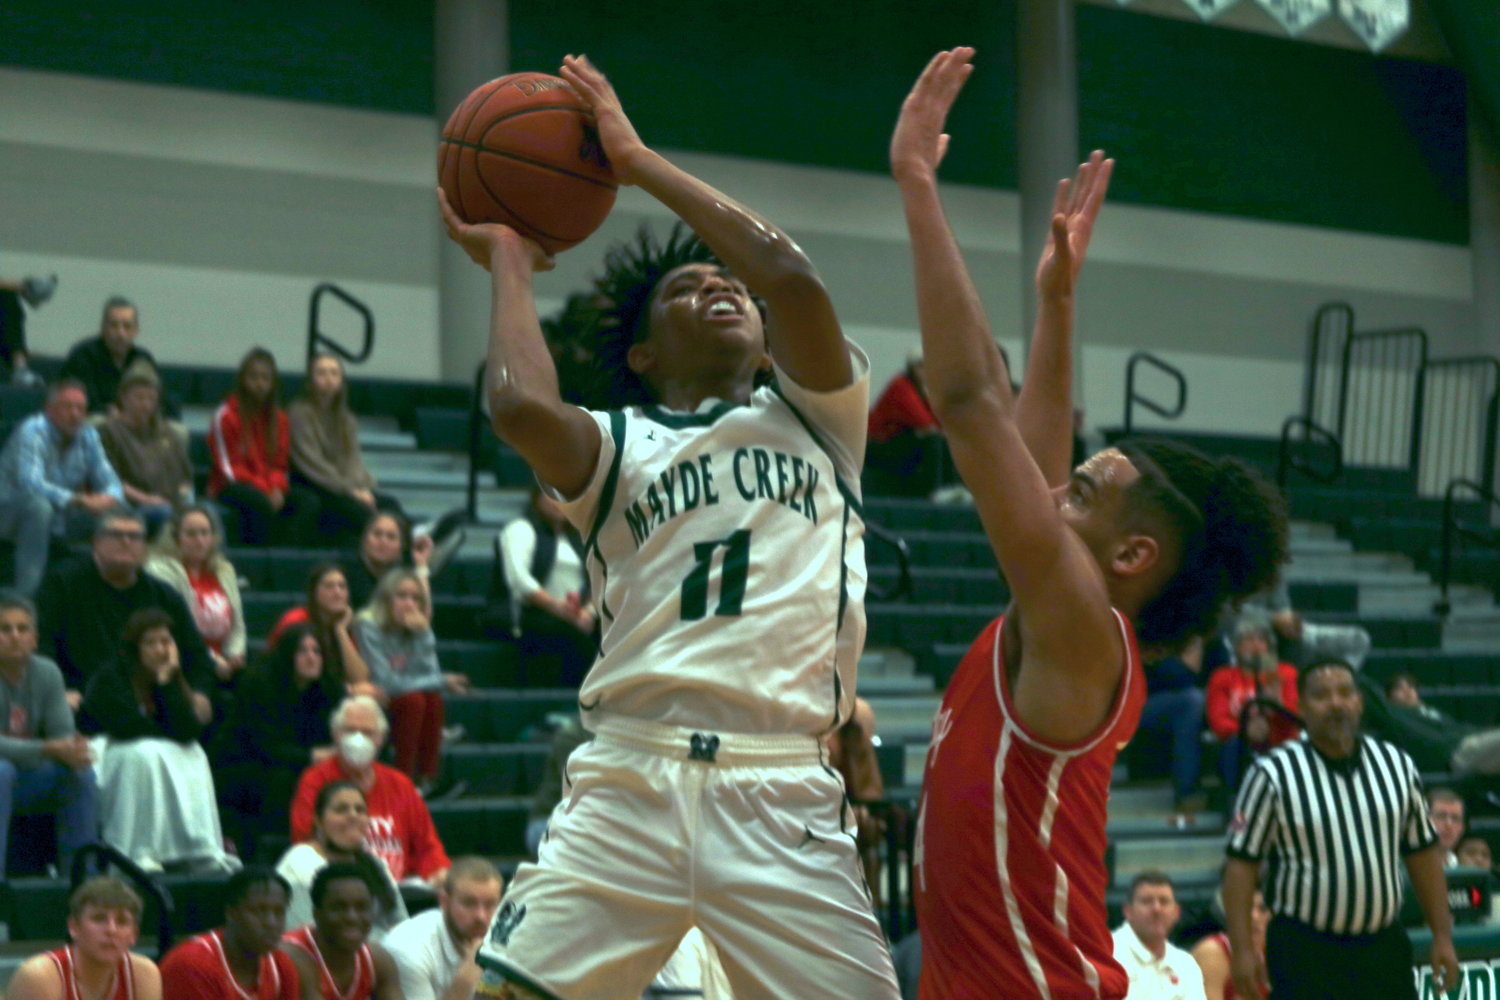 Mayde Creek’s Larison Lamette shoots over Katy’s Dayvaughn Froe during Wednesday’s game at the Mayde Creek gym.